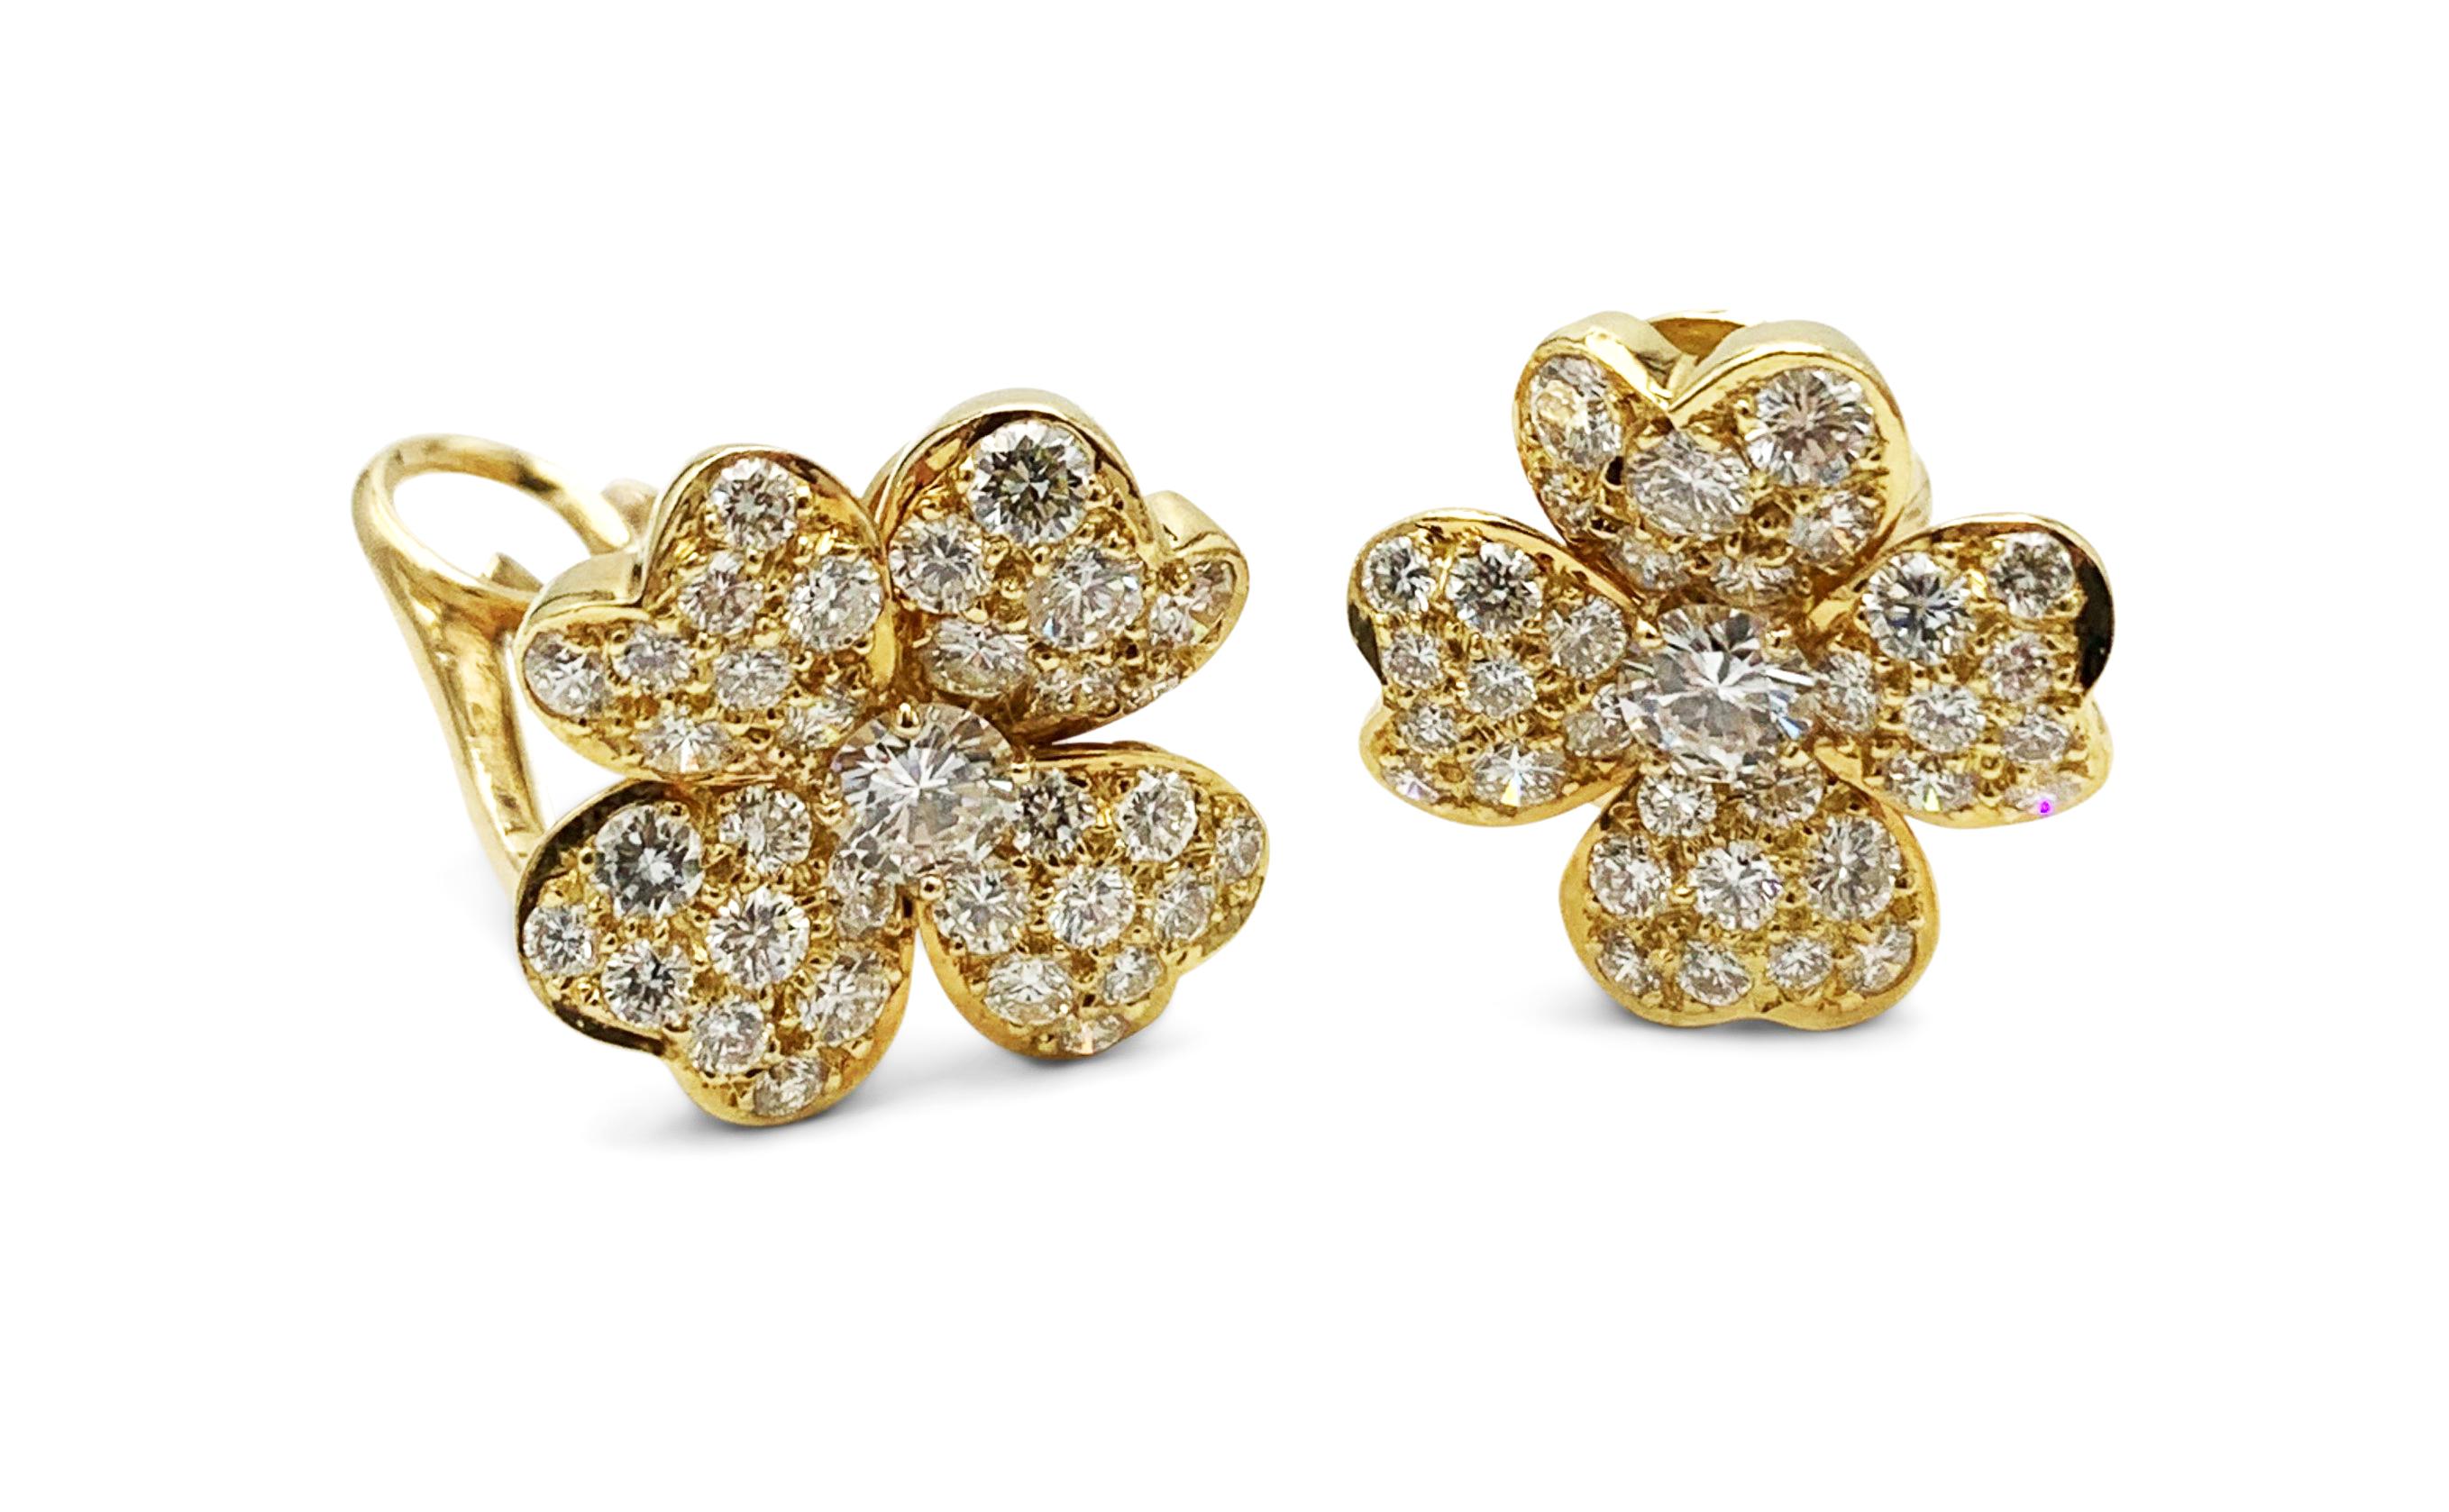 Authentic Van Cleef & Arpels 'Cosmos' earrings centering on a flower motif crafted in 18 karat yellow gold and set with high-quality round brilliant cut diamonds, weighing an estimated 2.00 cttw. Signed Van Cleef & Arpels NY, 750, with serial